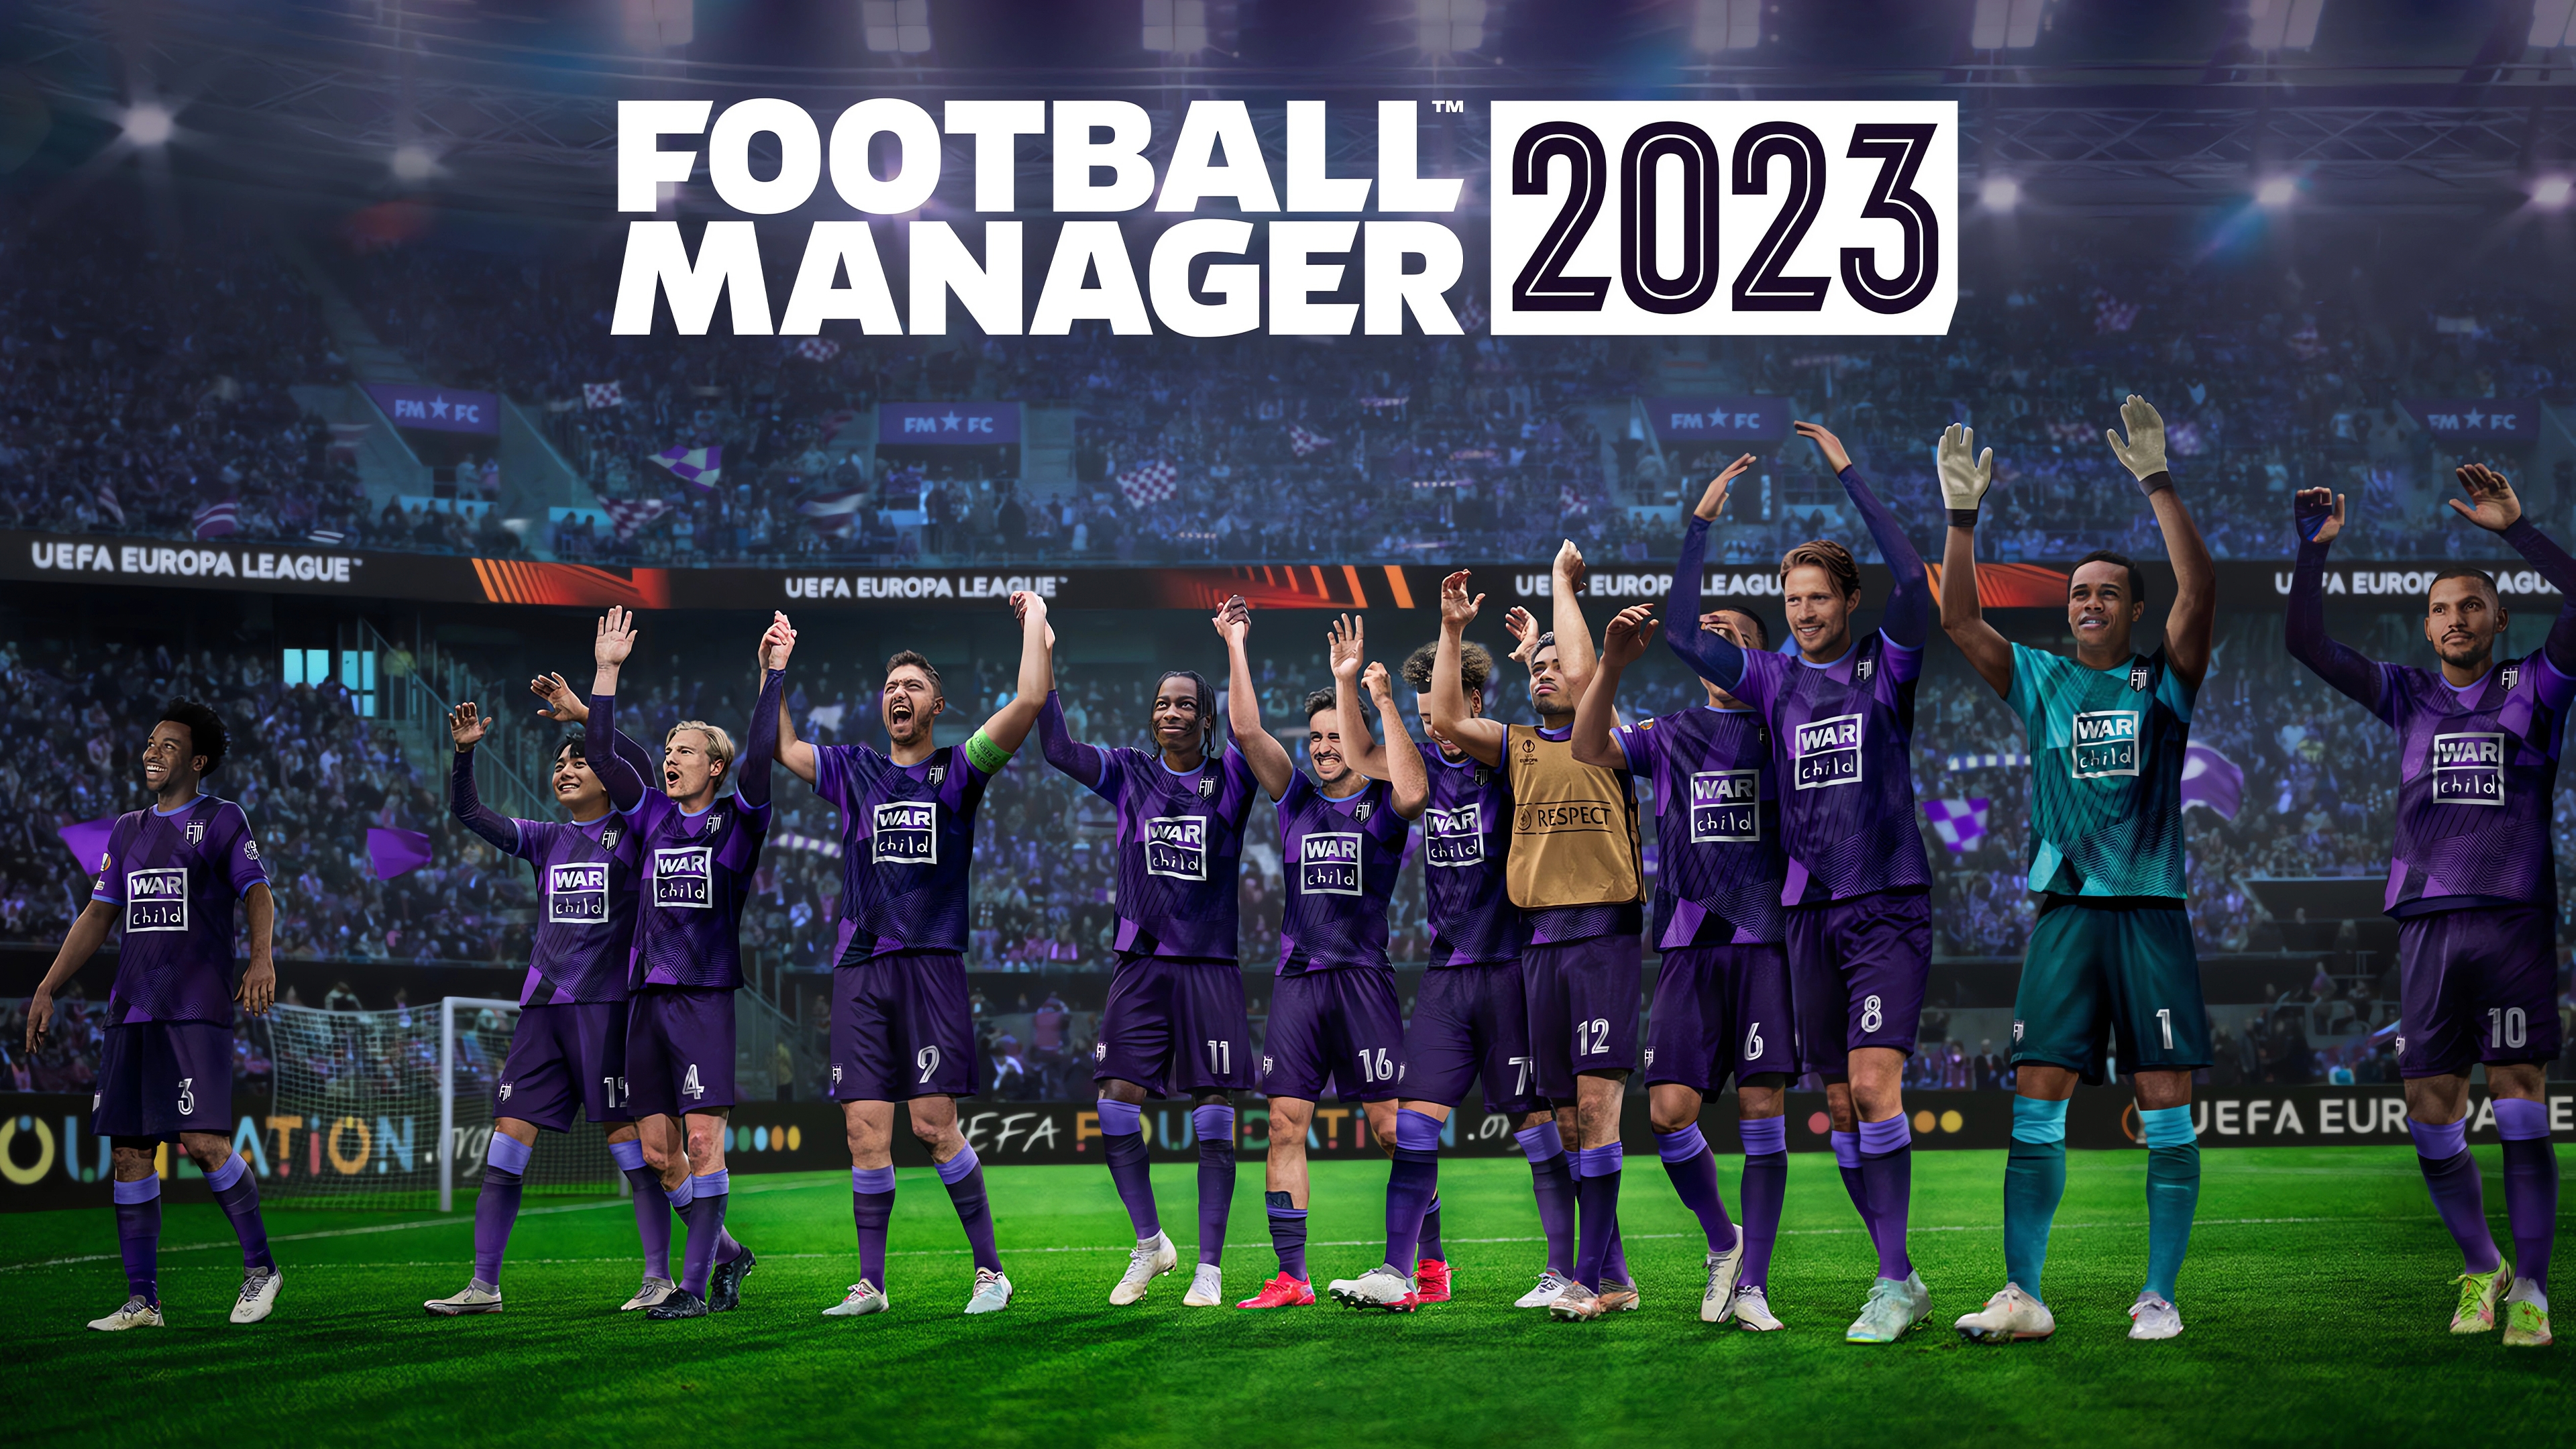 Football Manager 2022 Mobile now available for Pre-Order